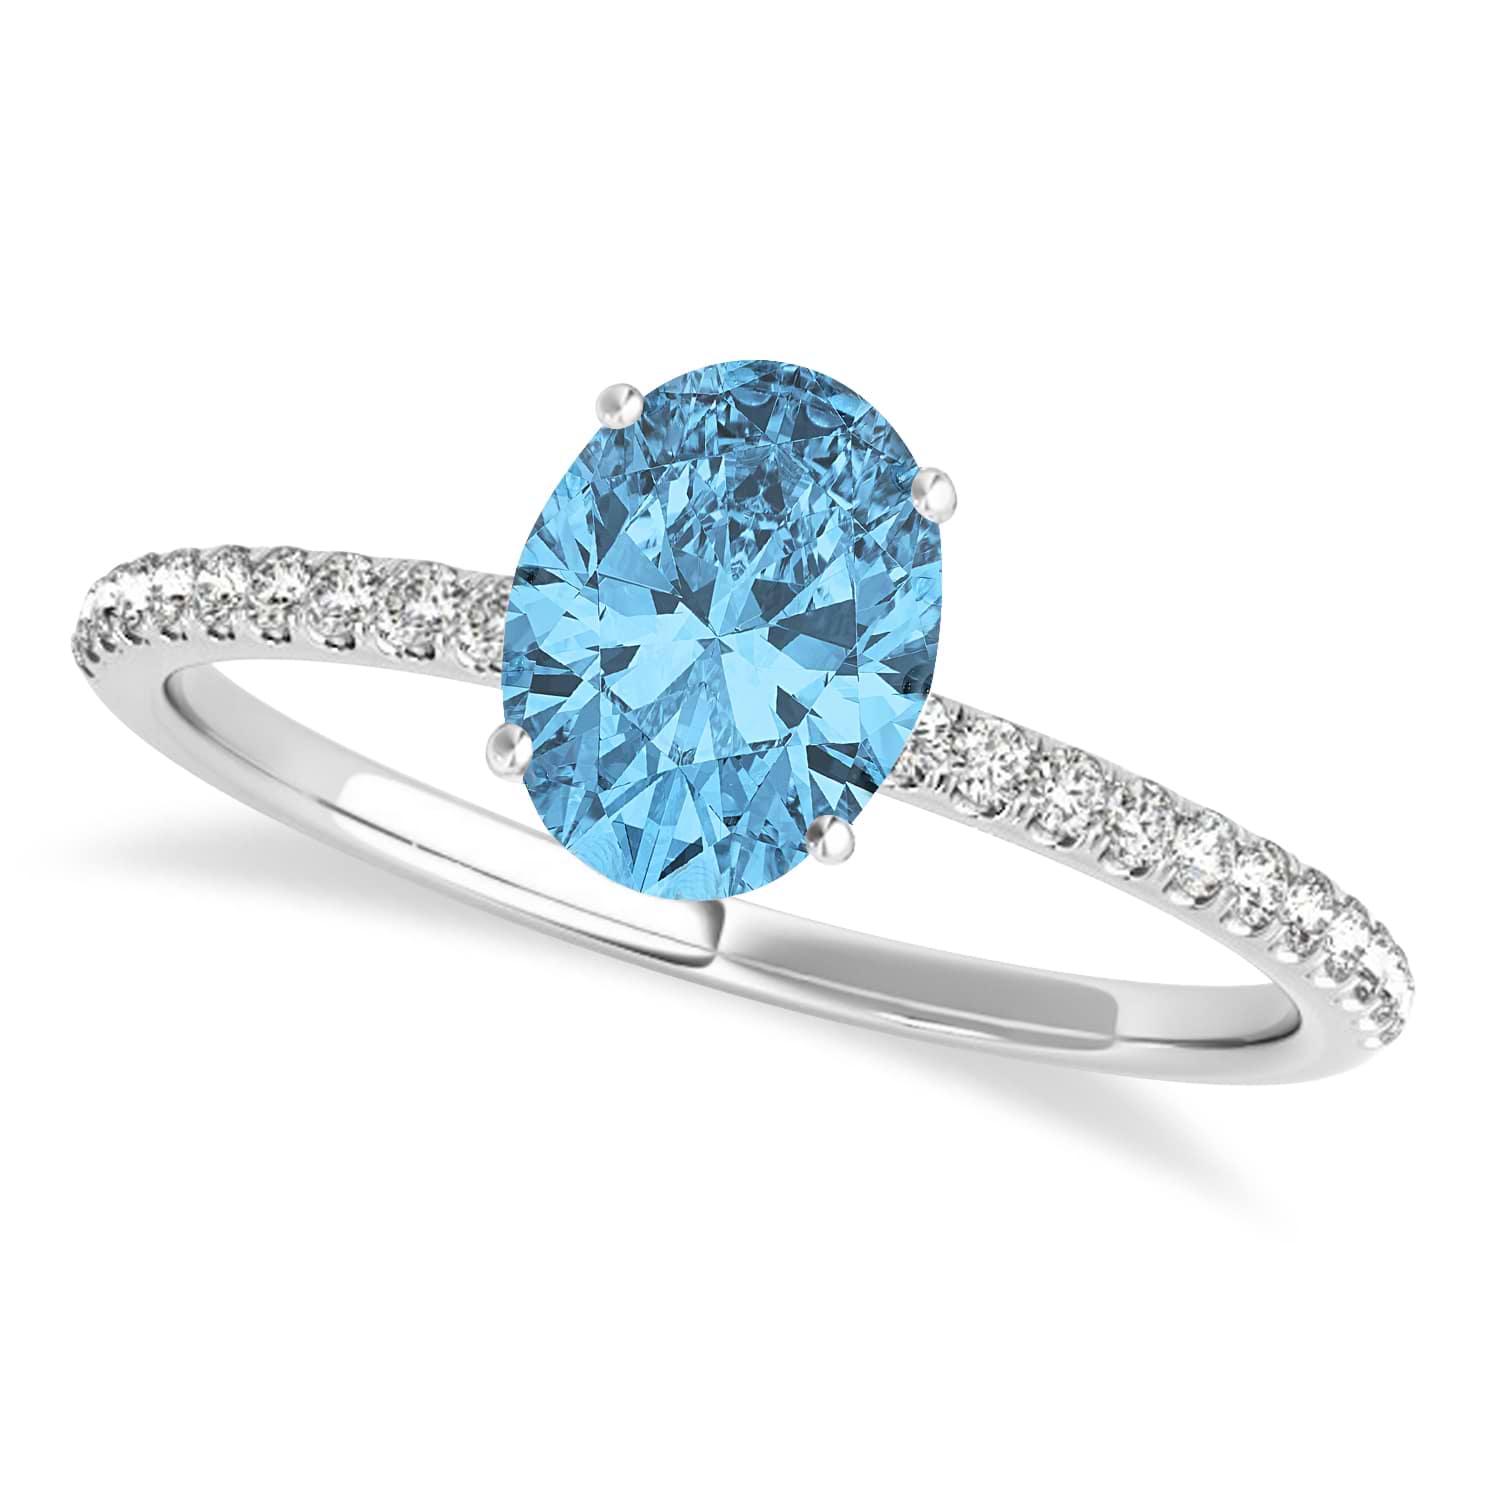 Blue Topaz & Diamond Accented Oval Shape Engagement Ring 14k White Gold (3.00ct)